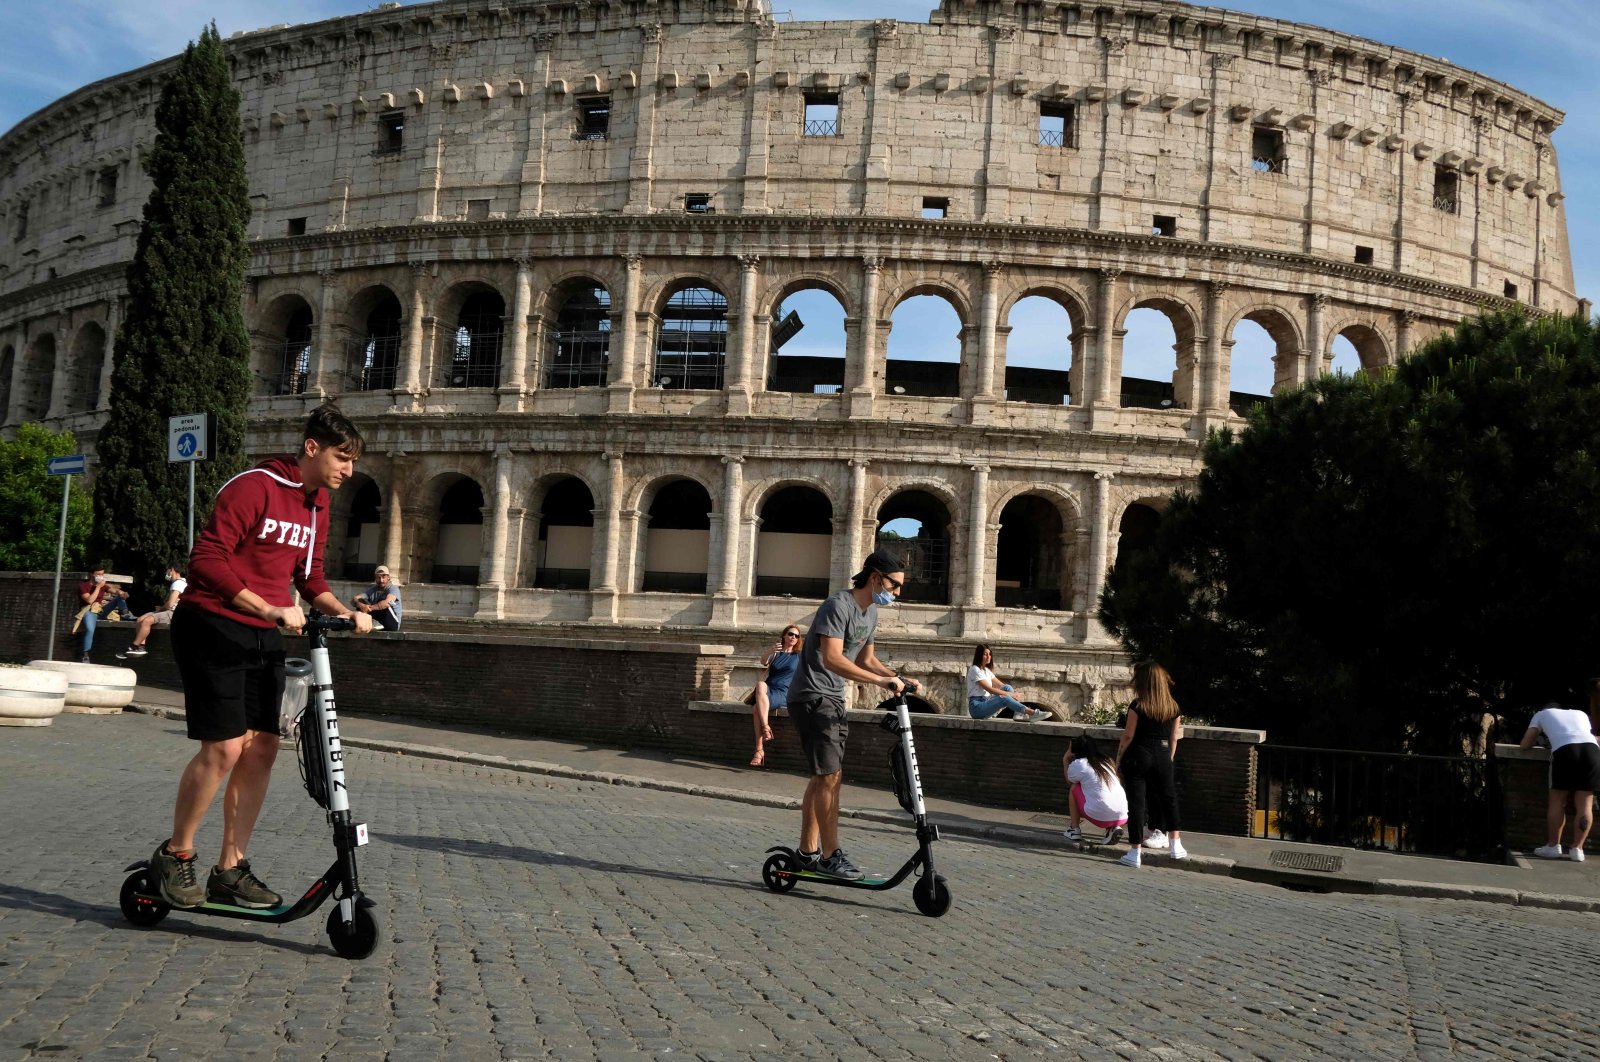 People ride electric scooters, past the Colosseum monument, Rome, May 28, 2020. (AFP Photo)